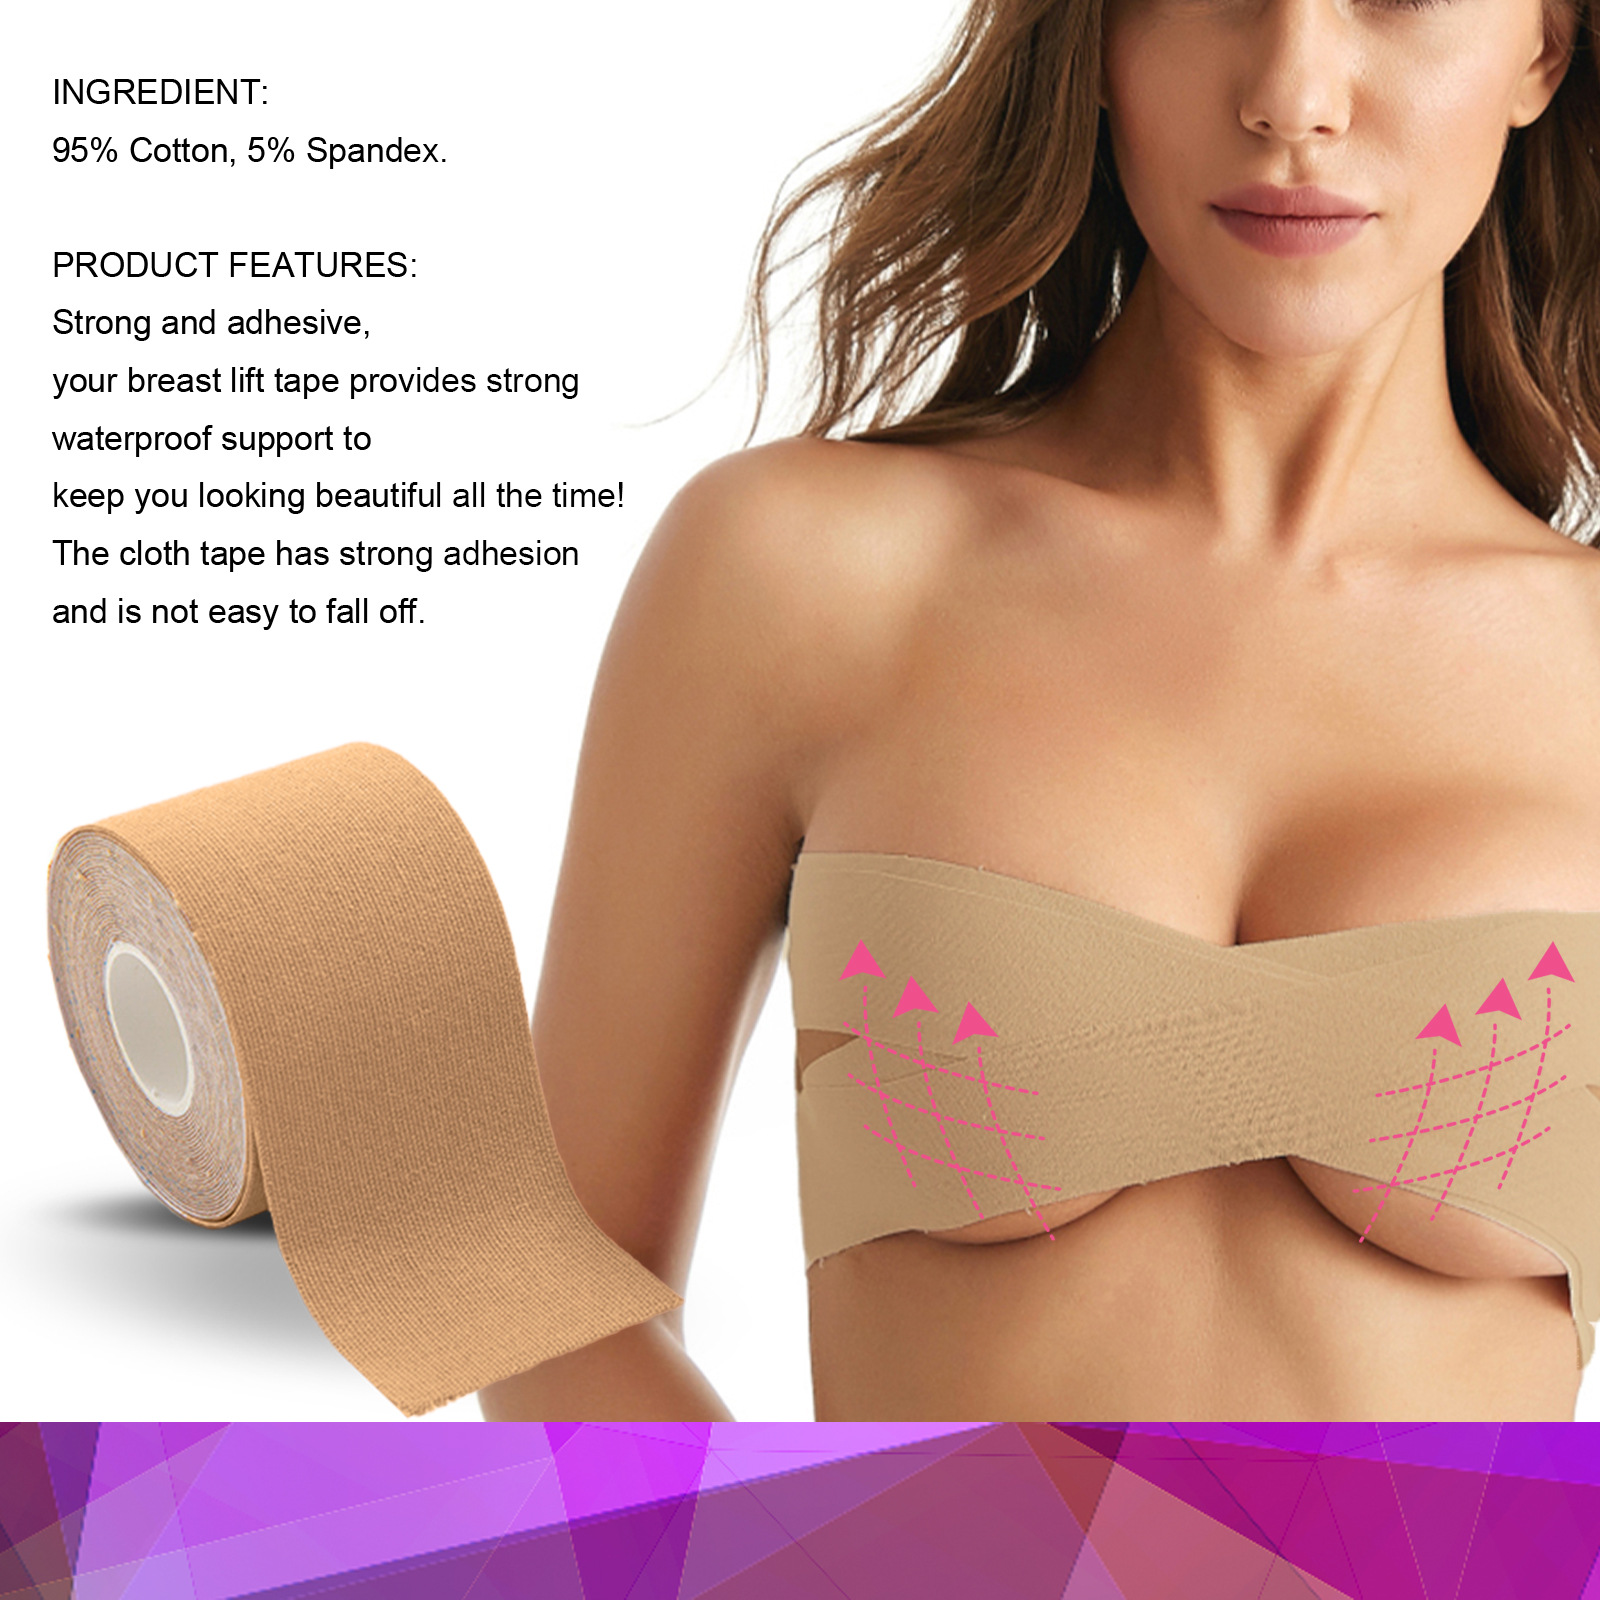 Damopro Breast Lift Tape for Boob – 23 Feet Long Breathable Breast Tape,  Strongly Adhesive for Large Breast – Hypoallergenic and Latex Free Bra Tape  for Women Brown, 23 feet 2 inch